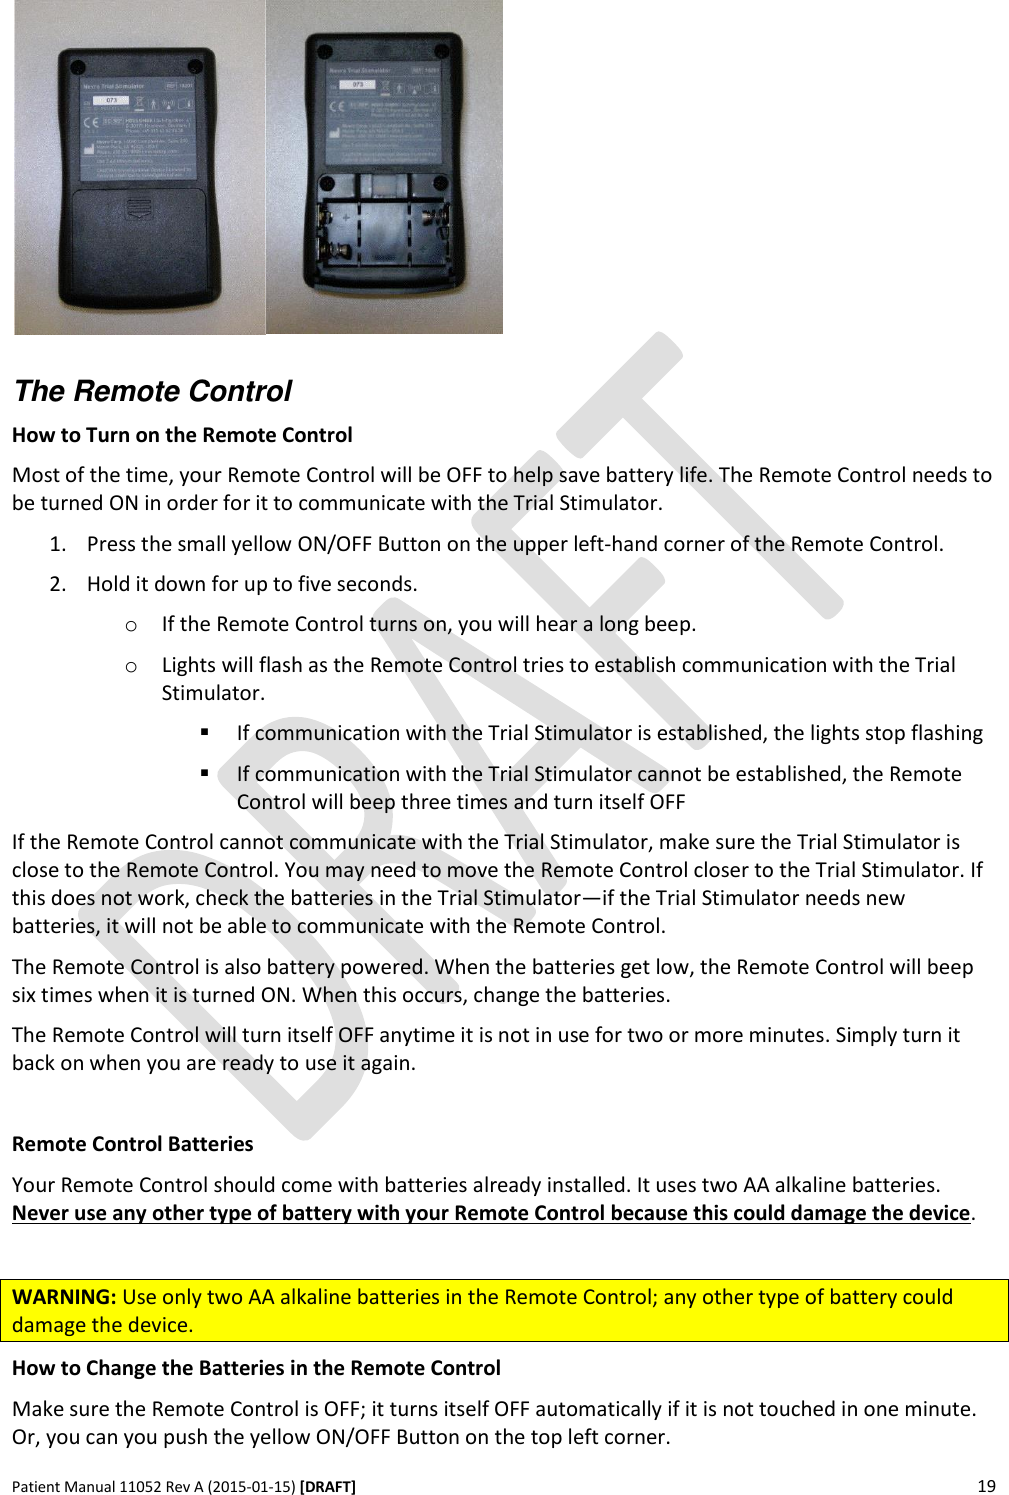      Patient Manual 11052 Rev A (2015-01-15) [DRAFT] 19     The Remote Control How to Turn on the Remote Control Most of the time, your Remote Control will be OFF to help save battery life. The Remote Control needs to be turned ON in order for it to communicate with the Trial Stimulator.  1. Press the small yellow ON/OFF Button on the upper left-hand corner of the Remote Control.  2. Hold it down for up to five seconds. o If the Remote Control turns on, you will hear a long beep. o Lights will flash as the Remote Control tries to establish communication with the Trial Stimulator.  If communication with the Trial Stimulator is established, the lights stop flashing  If communication with the Trial Stimulator cannot be established, the Remote Control will beep three times and turn itself OFF If the Remote Control cannot communicate with the Trial Stimulator, make sure the Trial Stimulator is close to the Remote Control. You may need to move the Remote Control closer to the Trial Stimulator. If this does not work, check the batteries in the Trial Stimulator—if the Trial Stimulator needs new batteries, it will not be able to communicate with the Remote Control. The Remote Control is also battery powered. When the batteries get low, the Remote Control will beep six times when it is turned ON. When this occurs, change the batteries.  The Remote Control will turn itself OFF anytime it is not in use for two or more minutes. Simply turn it back on when you are ready to use it again.  Remote Control Batteries Your Remote Control should come with batteries already installed. It uses two AA alkaline batteries. Never use any other type of battery with your Remote Control because this could damage the device.  WARNING: Use only two AA alkaline batteries in the Remote Control; any other type of battery could damage the device. How to Change the Batteries in the Remote Control Make sure the Remote Control is OFF; it turns itself OFF automatically if it is not touched in one minute. Or, you can you push the yellow ON/OFF Button on the top left corner. 